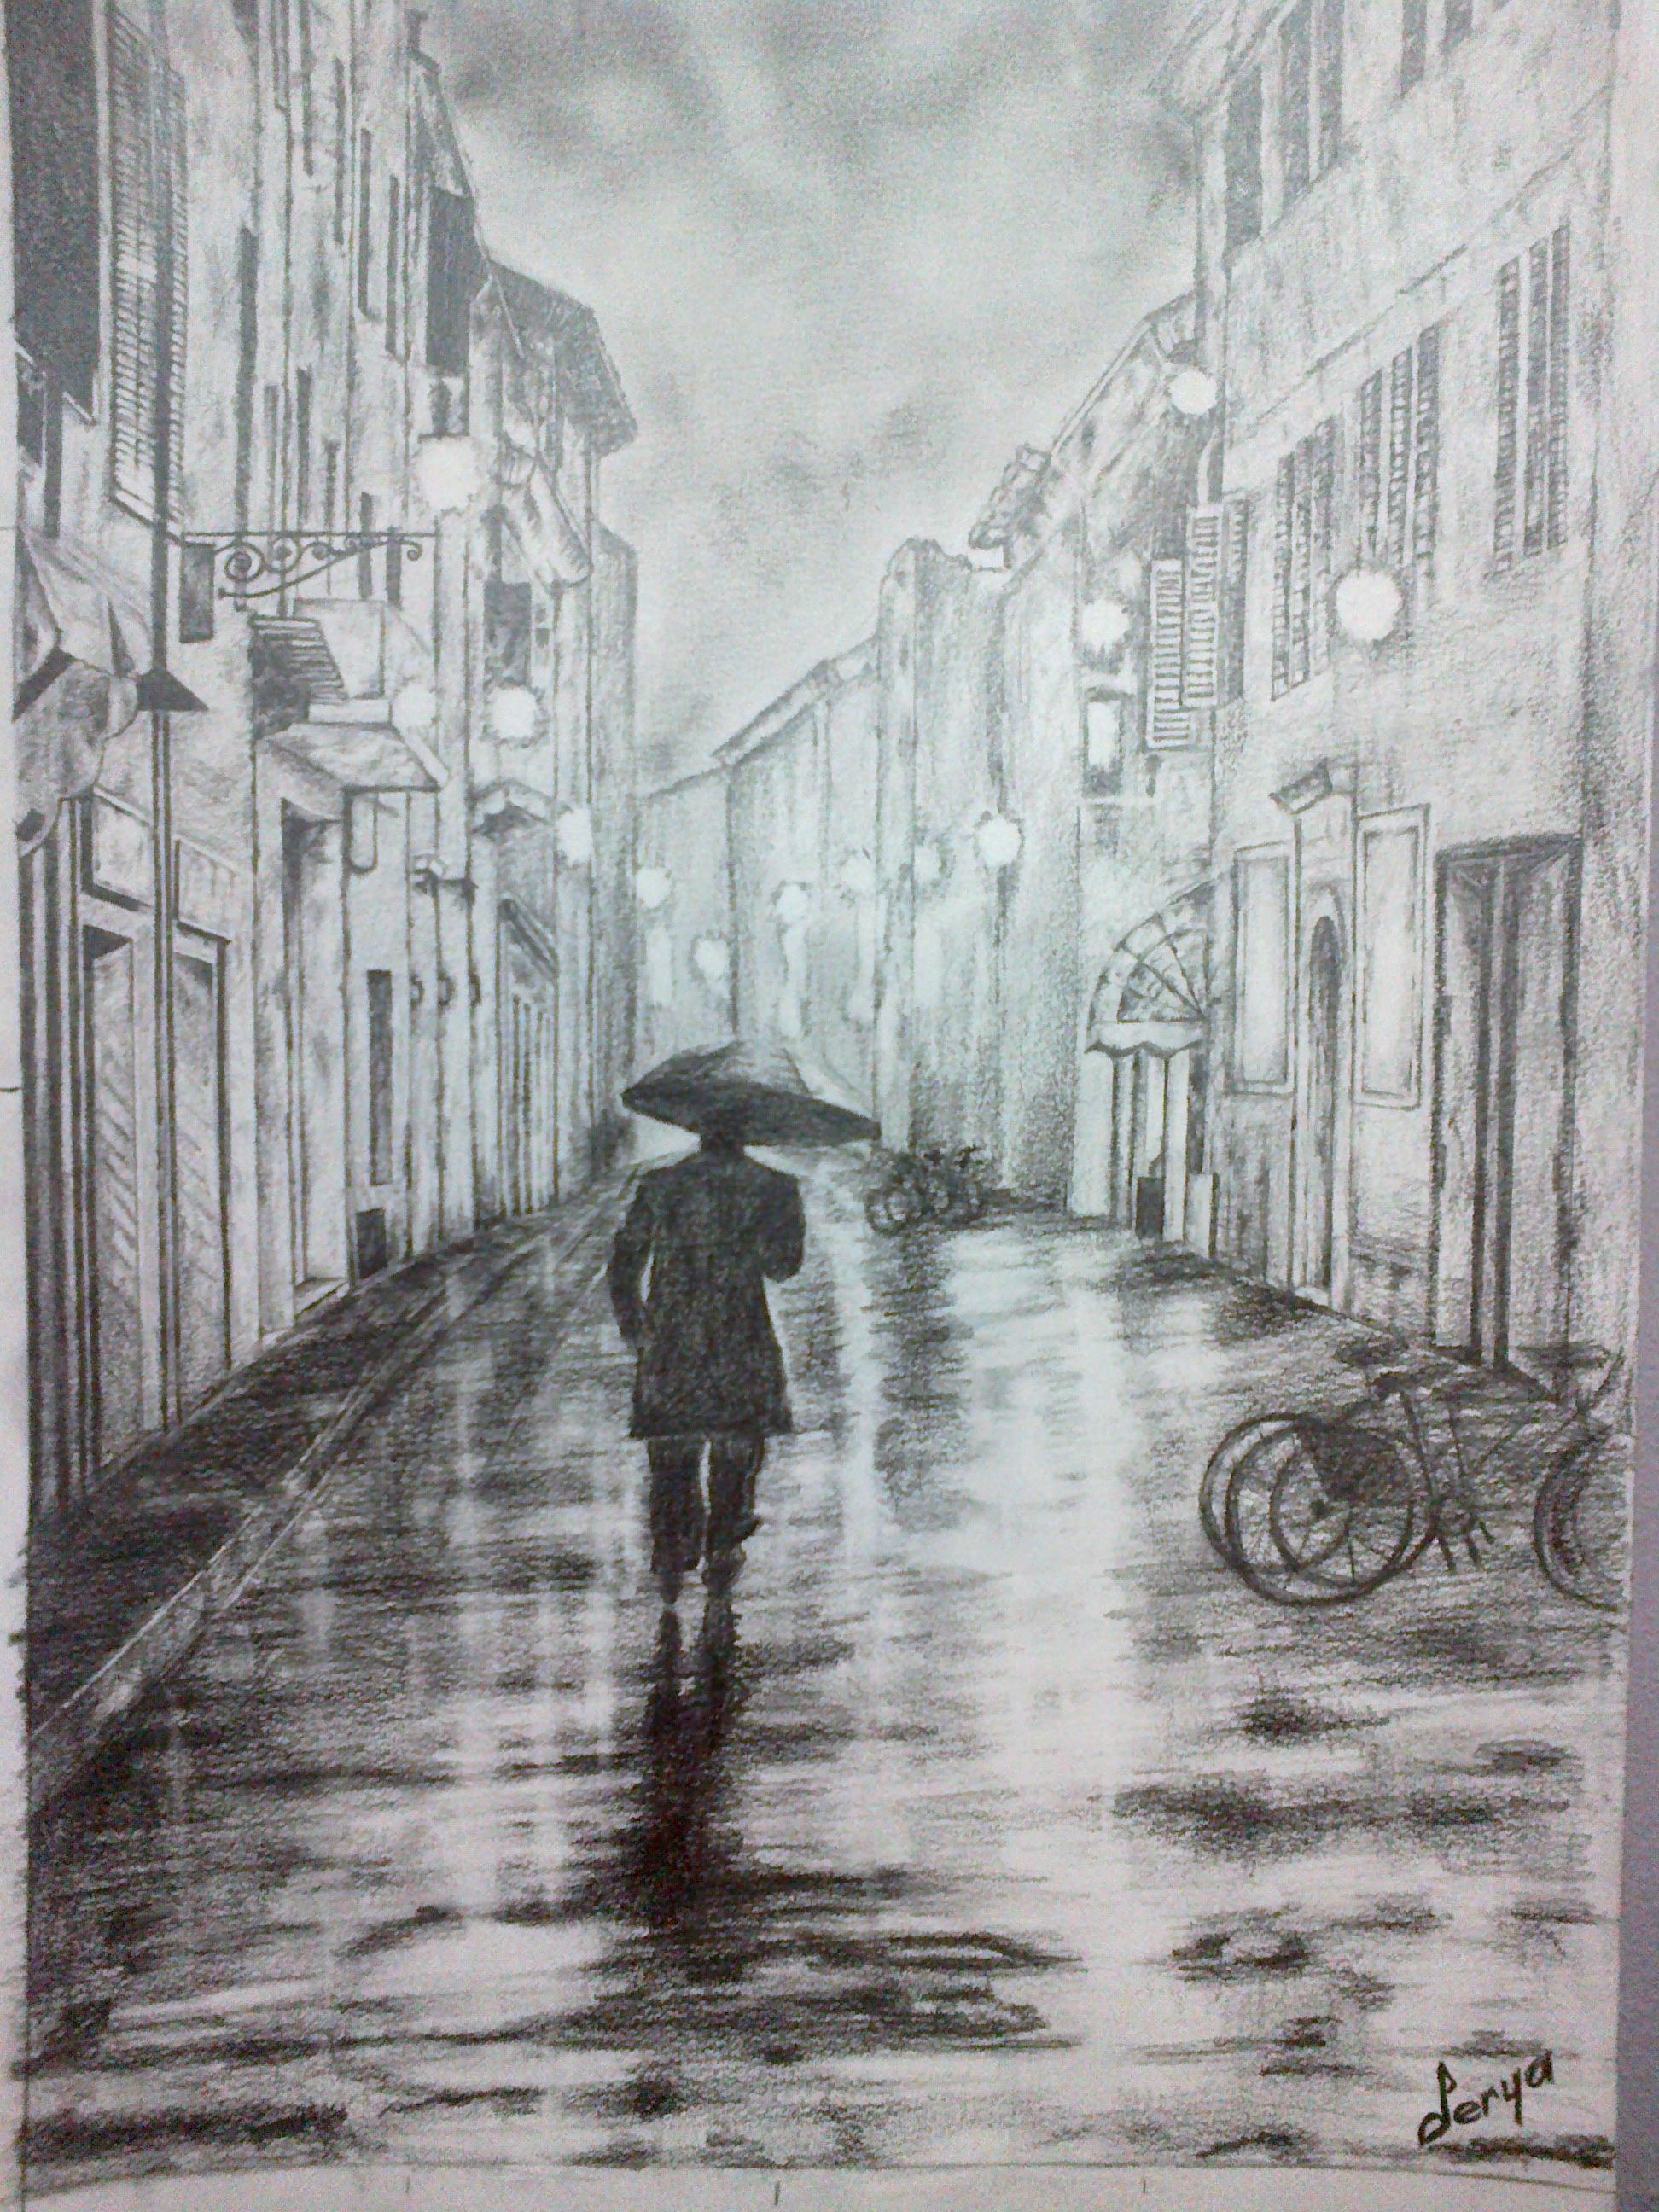  Rainy Day Sketch at PaintingValley.com Explore collection of Rainy 